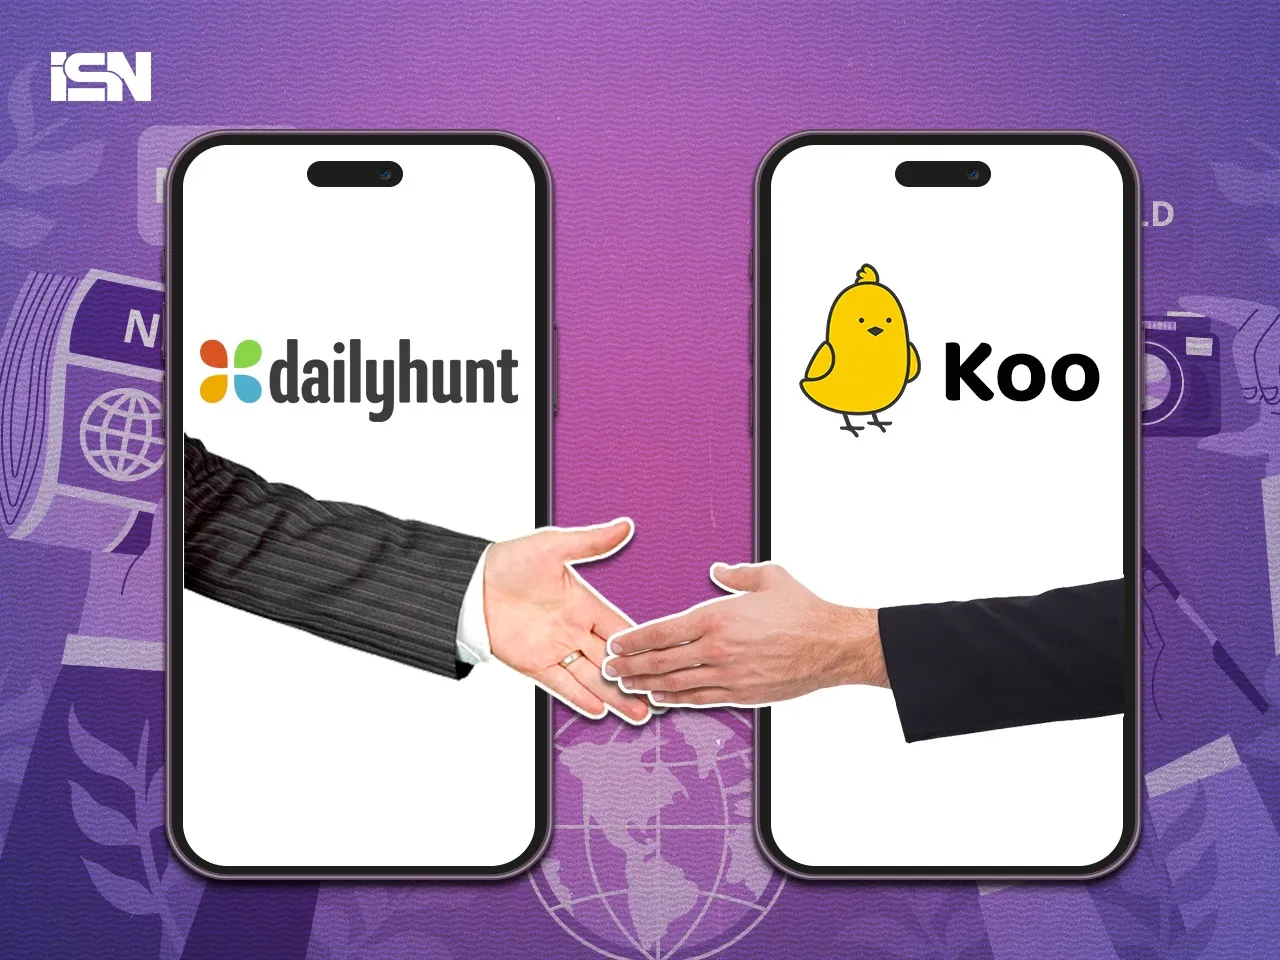 Dailyhunt in talks to buy Koo, India's touted competitor to Twitter (now X)